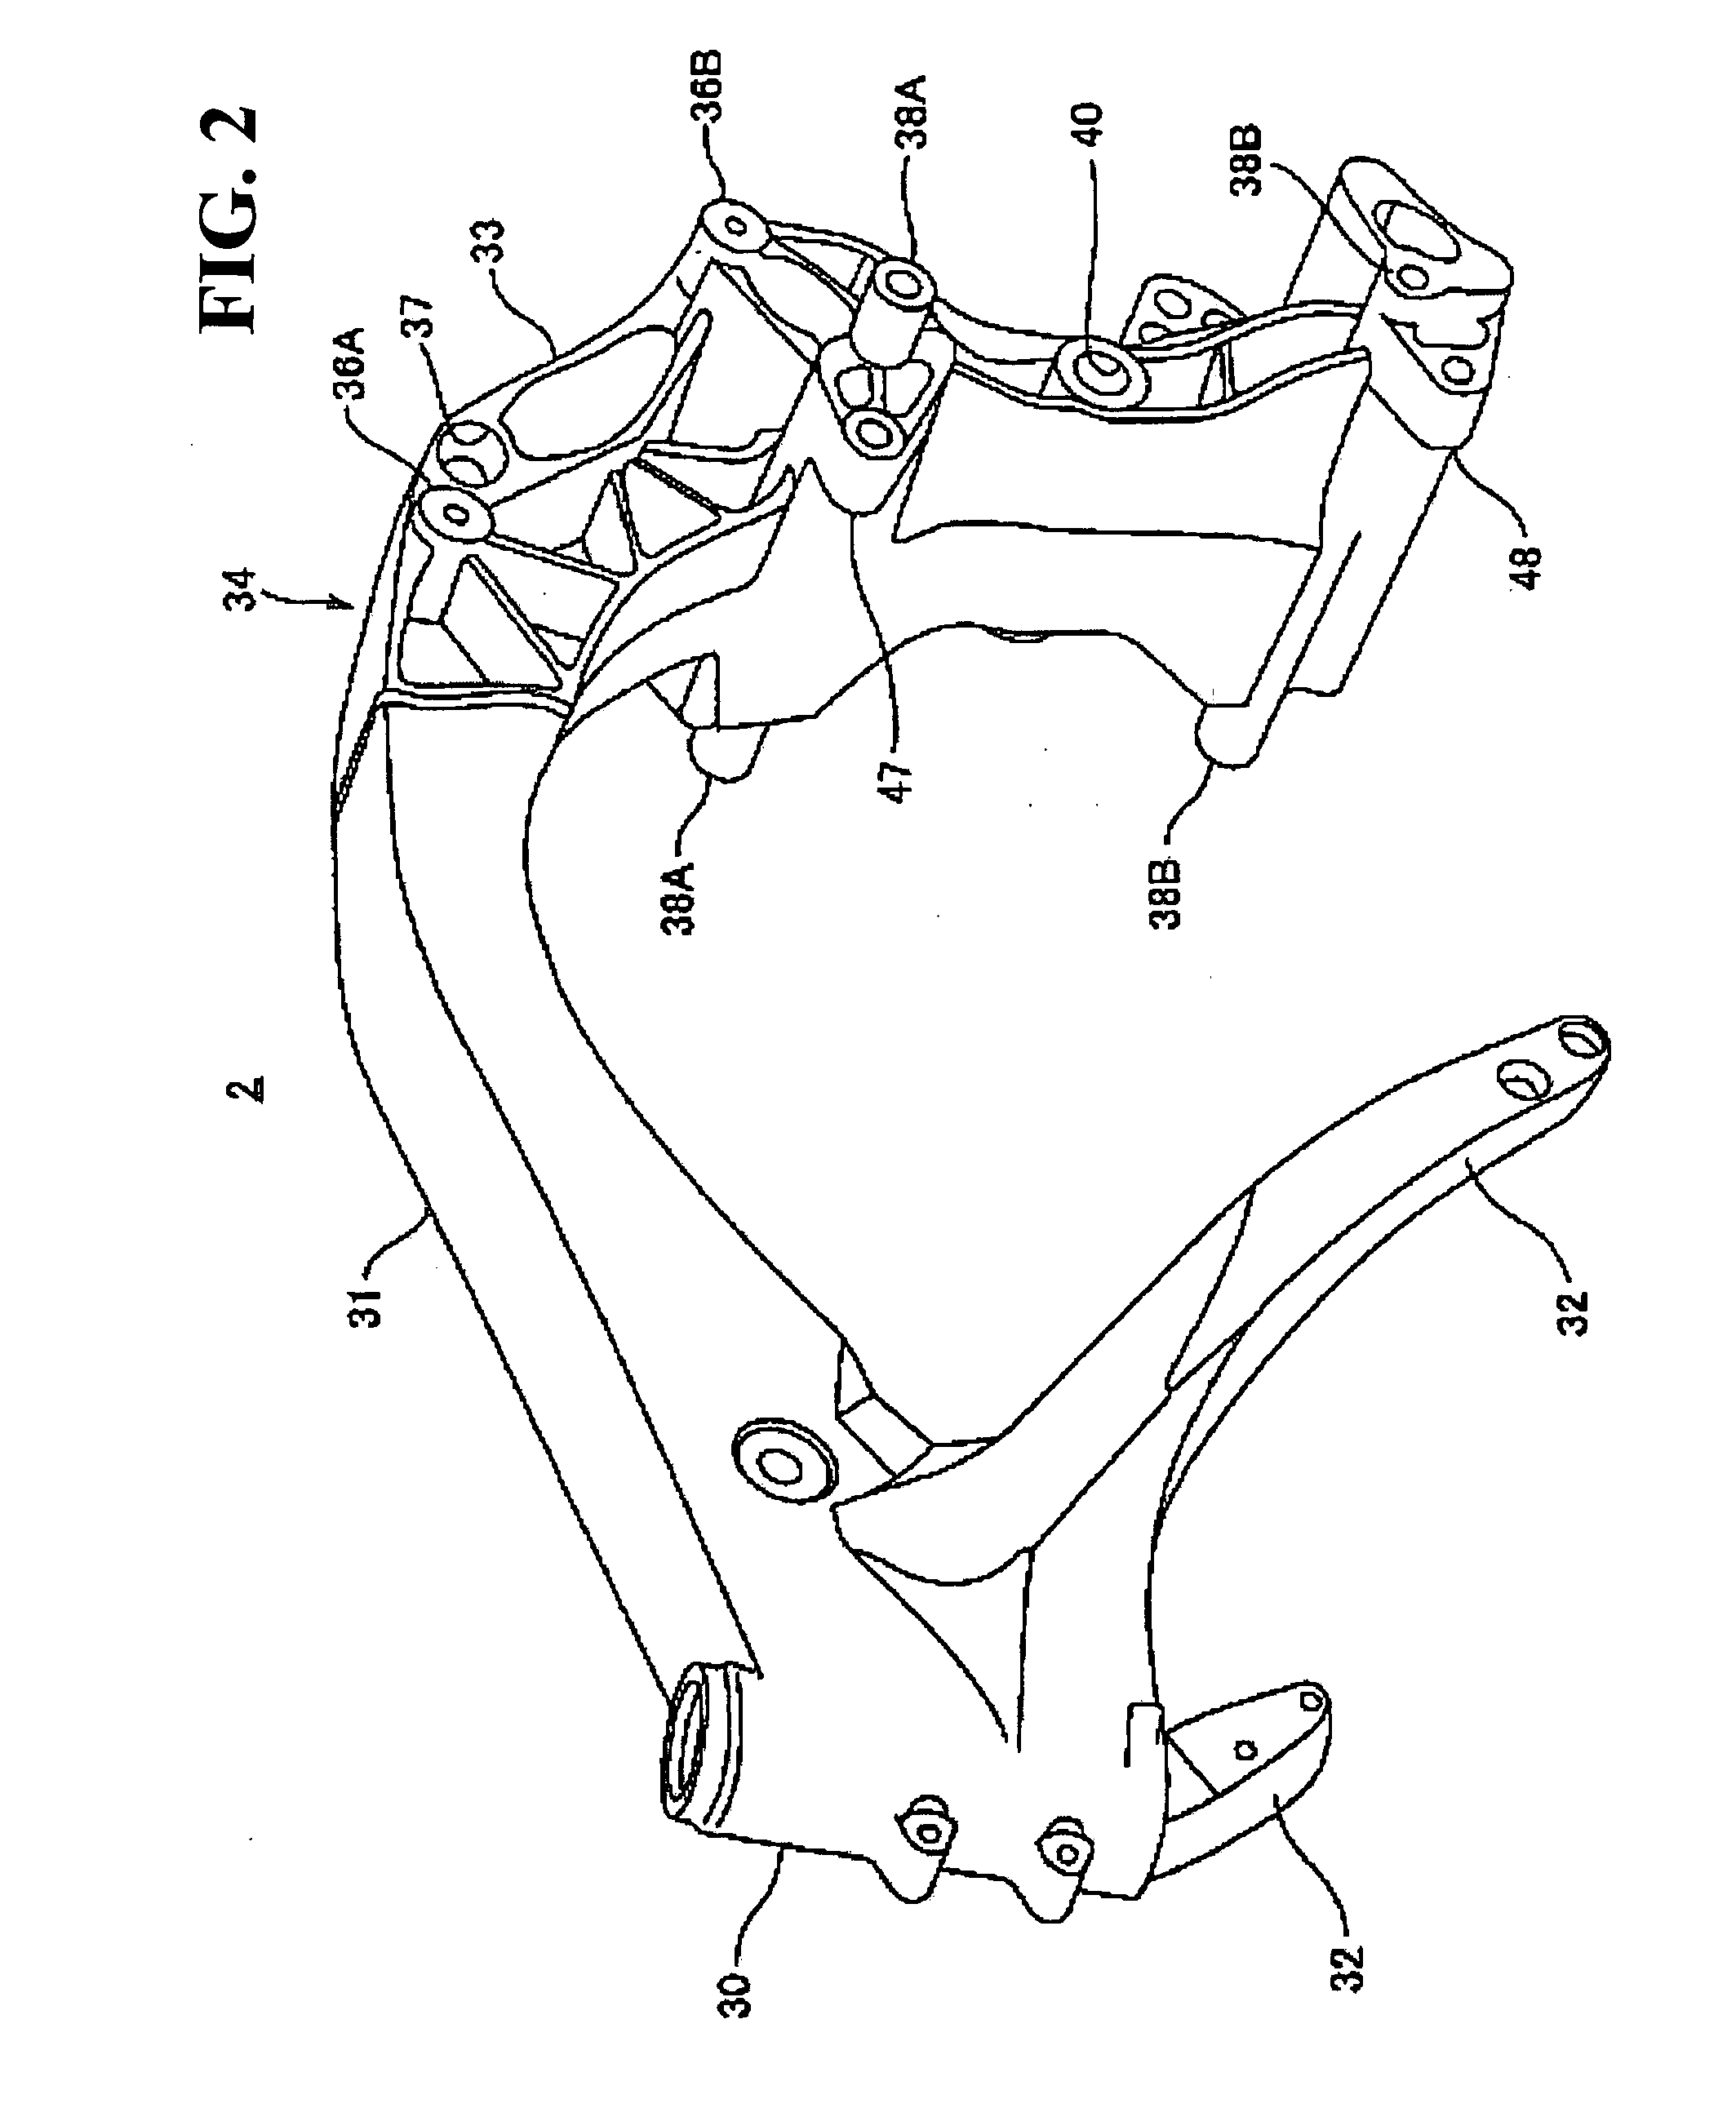 Intake device of motorcycle